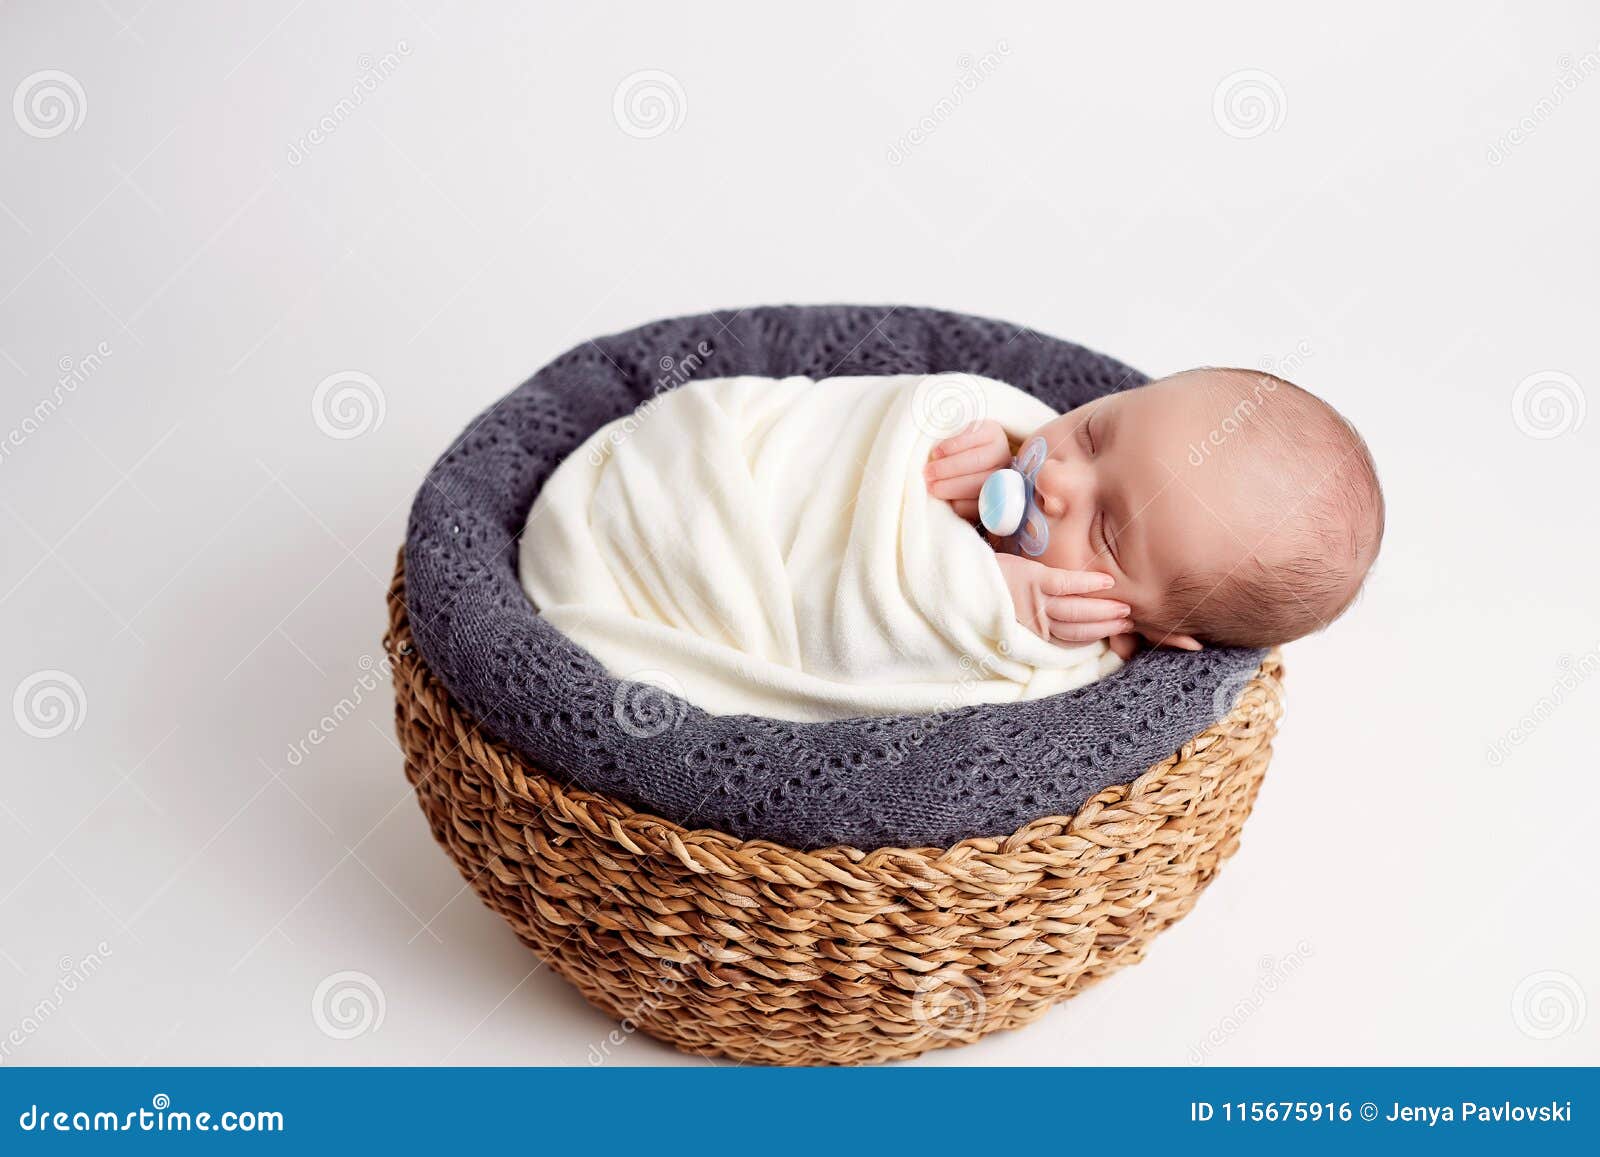 Newborn Baby Boy, Sleeping Peacefully in Basket, Dressed in Knitted Outfit,  Chilling Out, Happy and Cute Stock Photo - Image of human, baby: 115675916